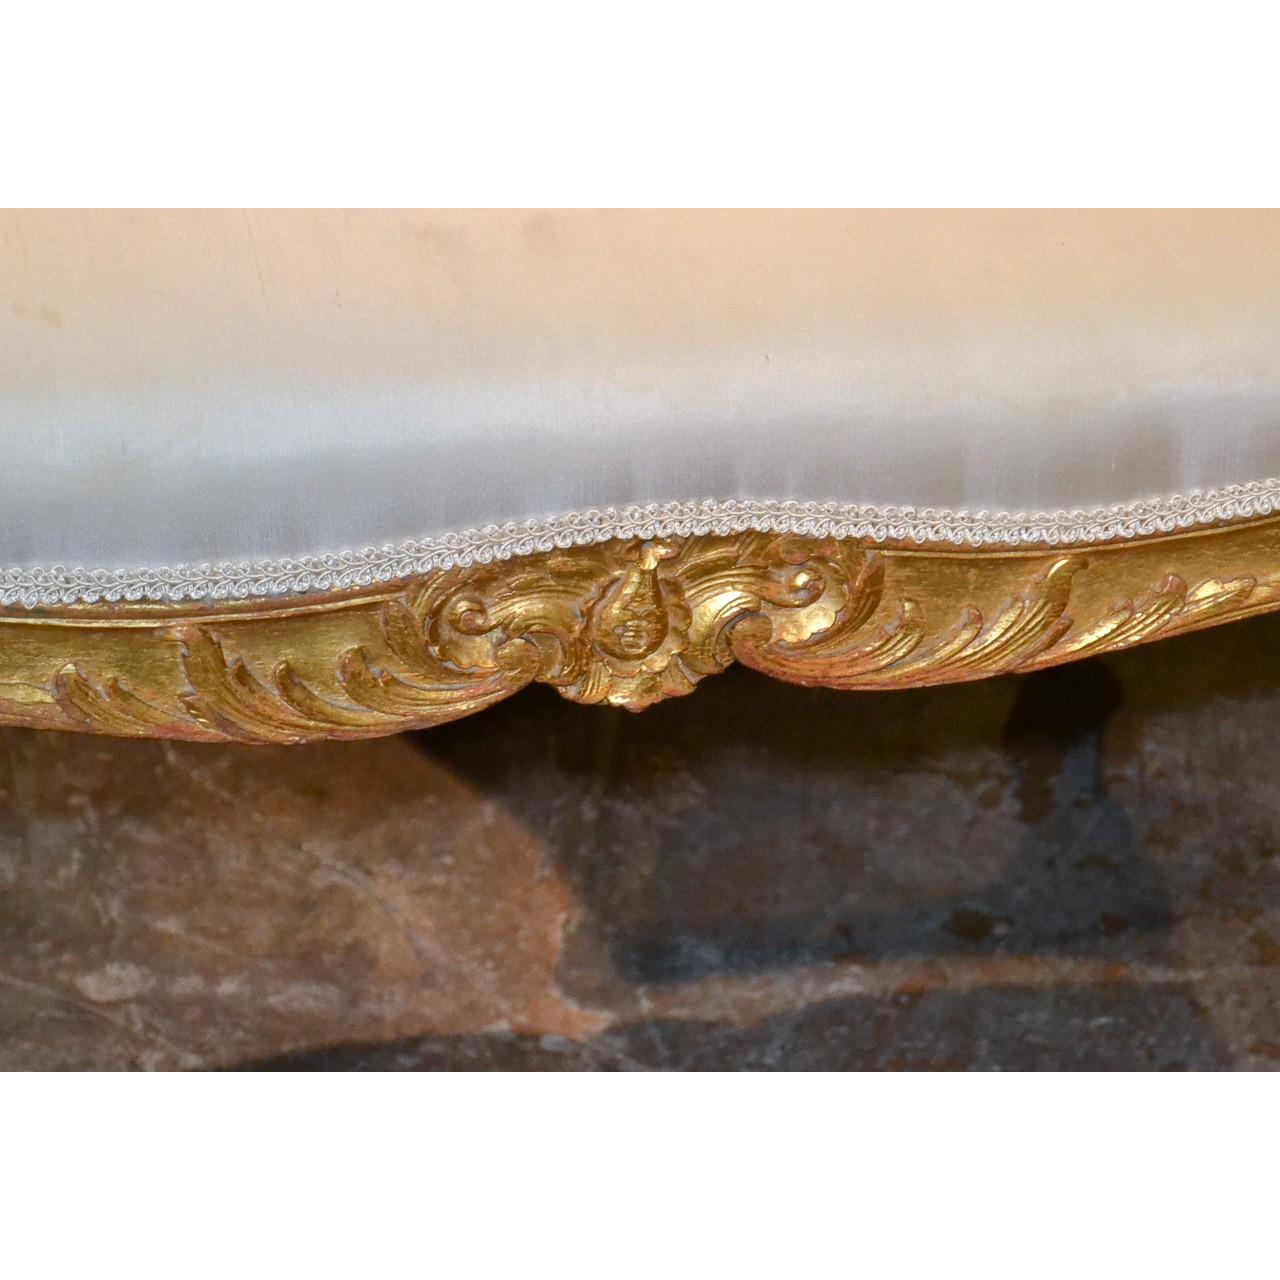 Stunning 19th century French Louis XV style giltwood bench with finely upholstered top. The shaped skirt and cabriole legs superbly carved with acanthus leaves and flower heads,

circa 1890.

Fabulous look for a variety of interior concepts.